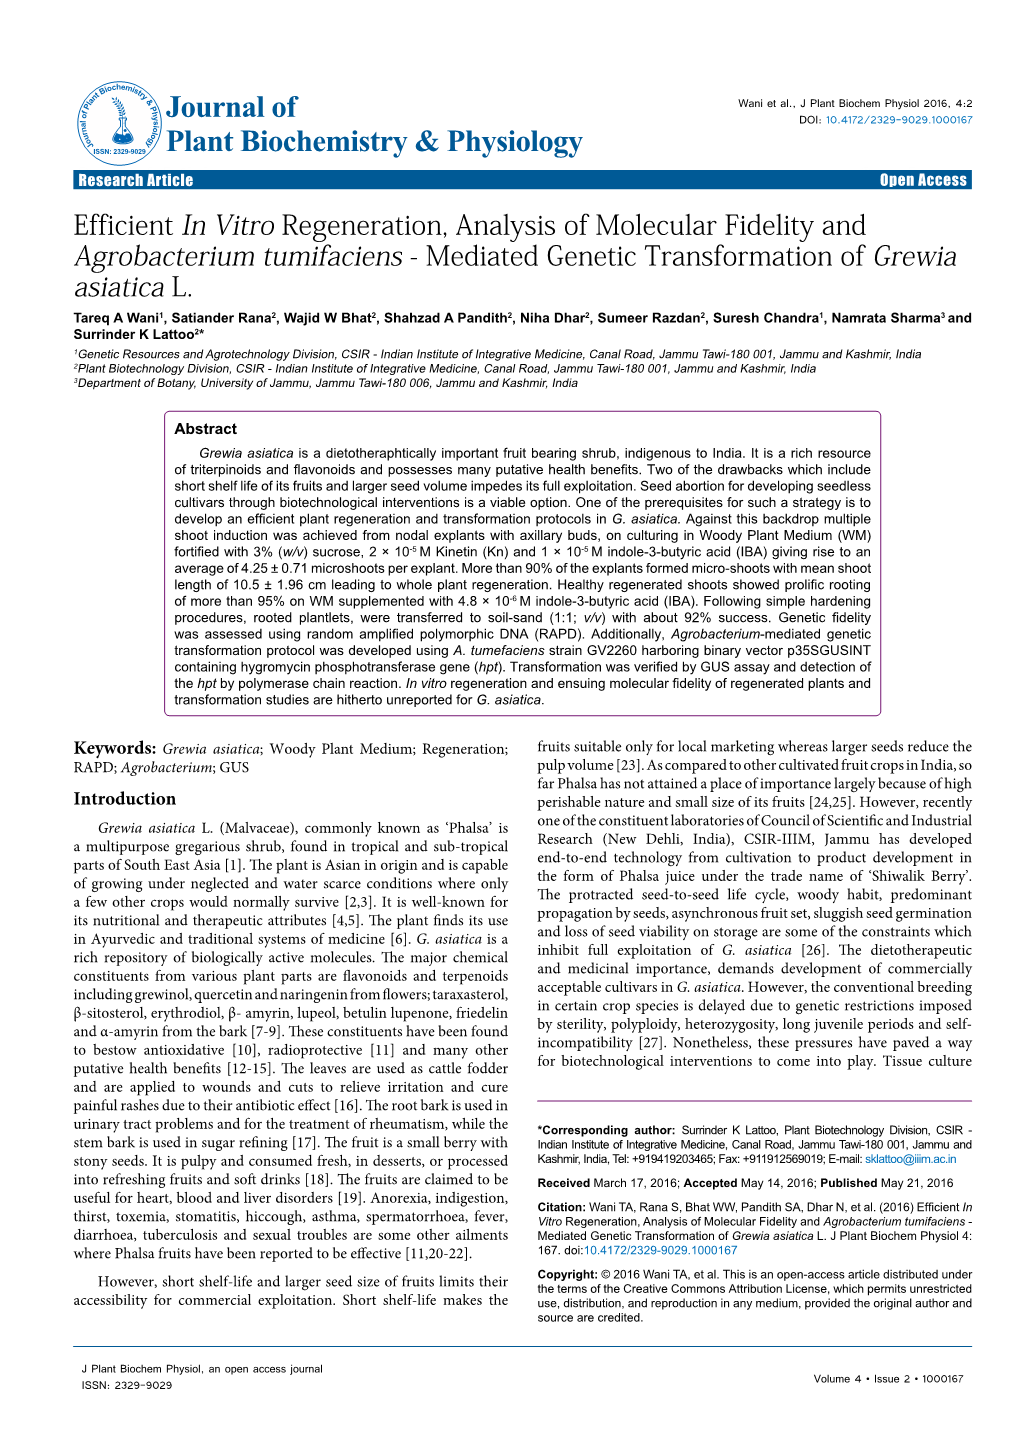 Efficient in Vitro Regeneration, Analysis of Molecular Fidelity and Agrobacterium Tumifaciens - Mediated Genetic Transformation of Grewia Asiatica L